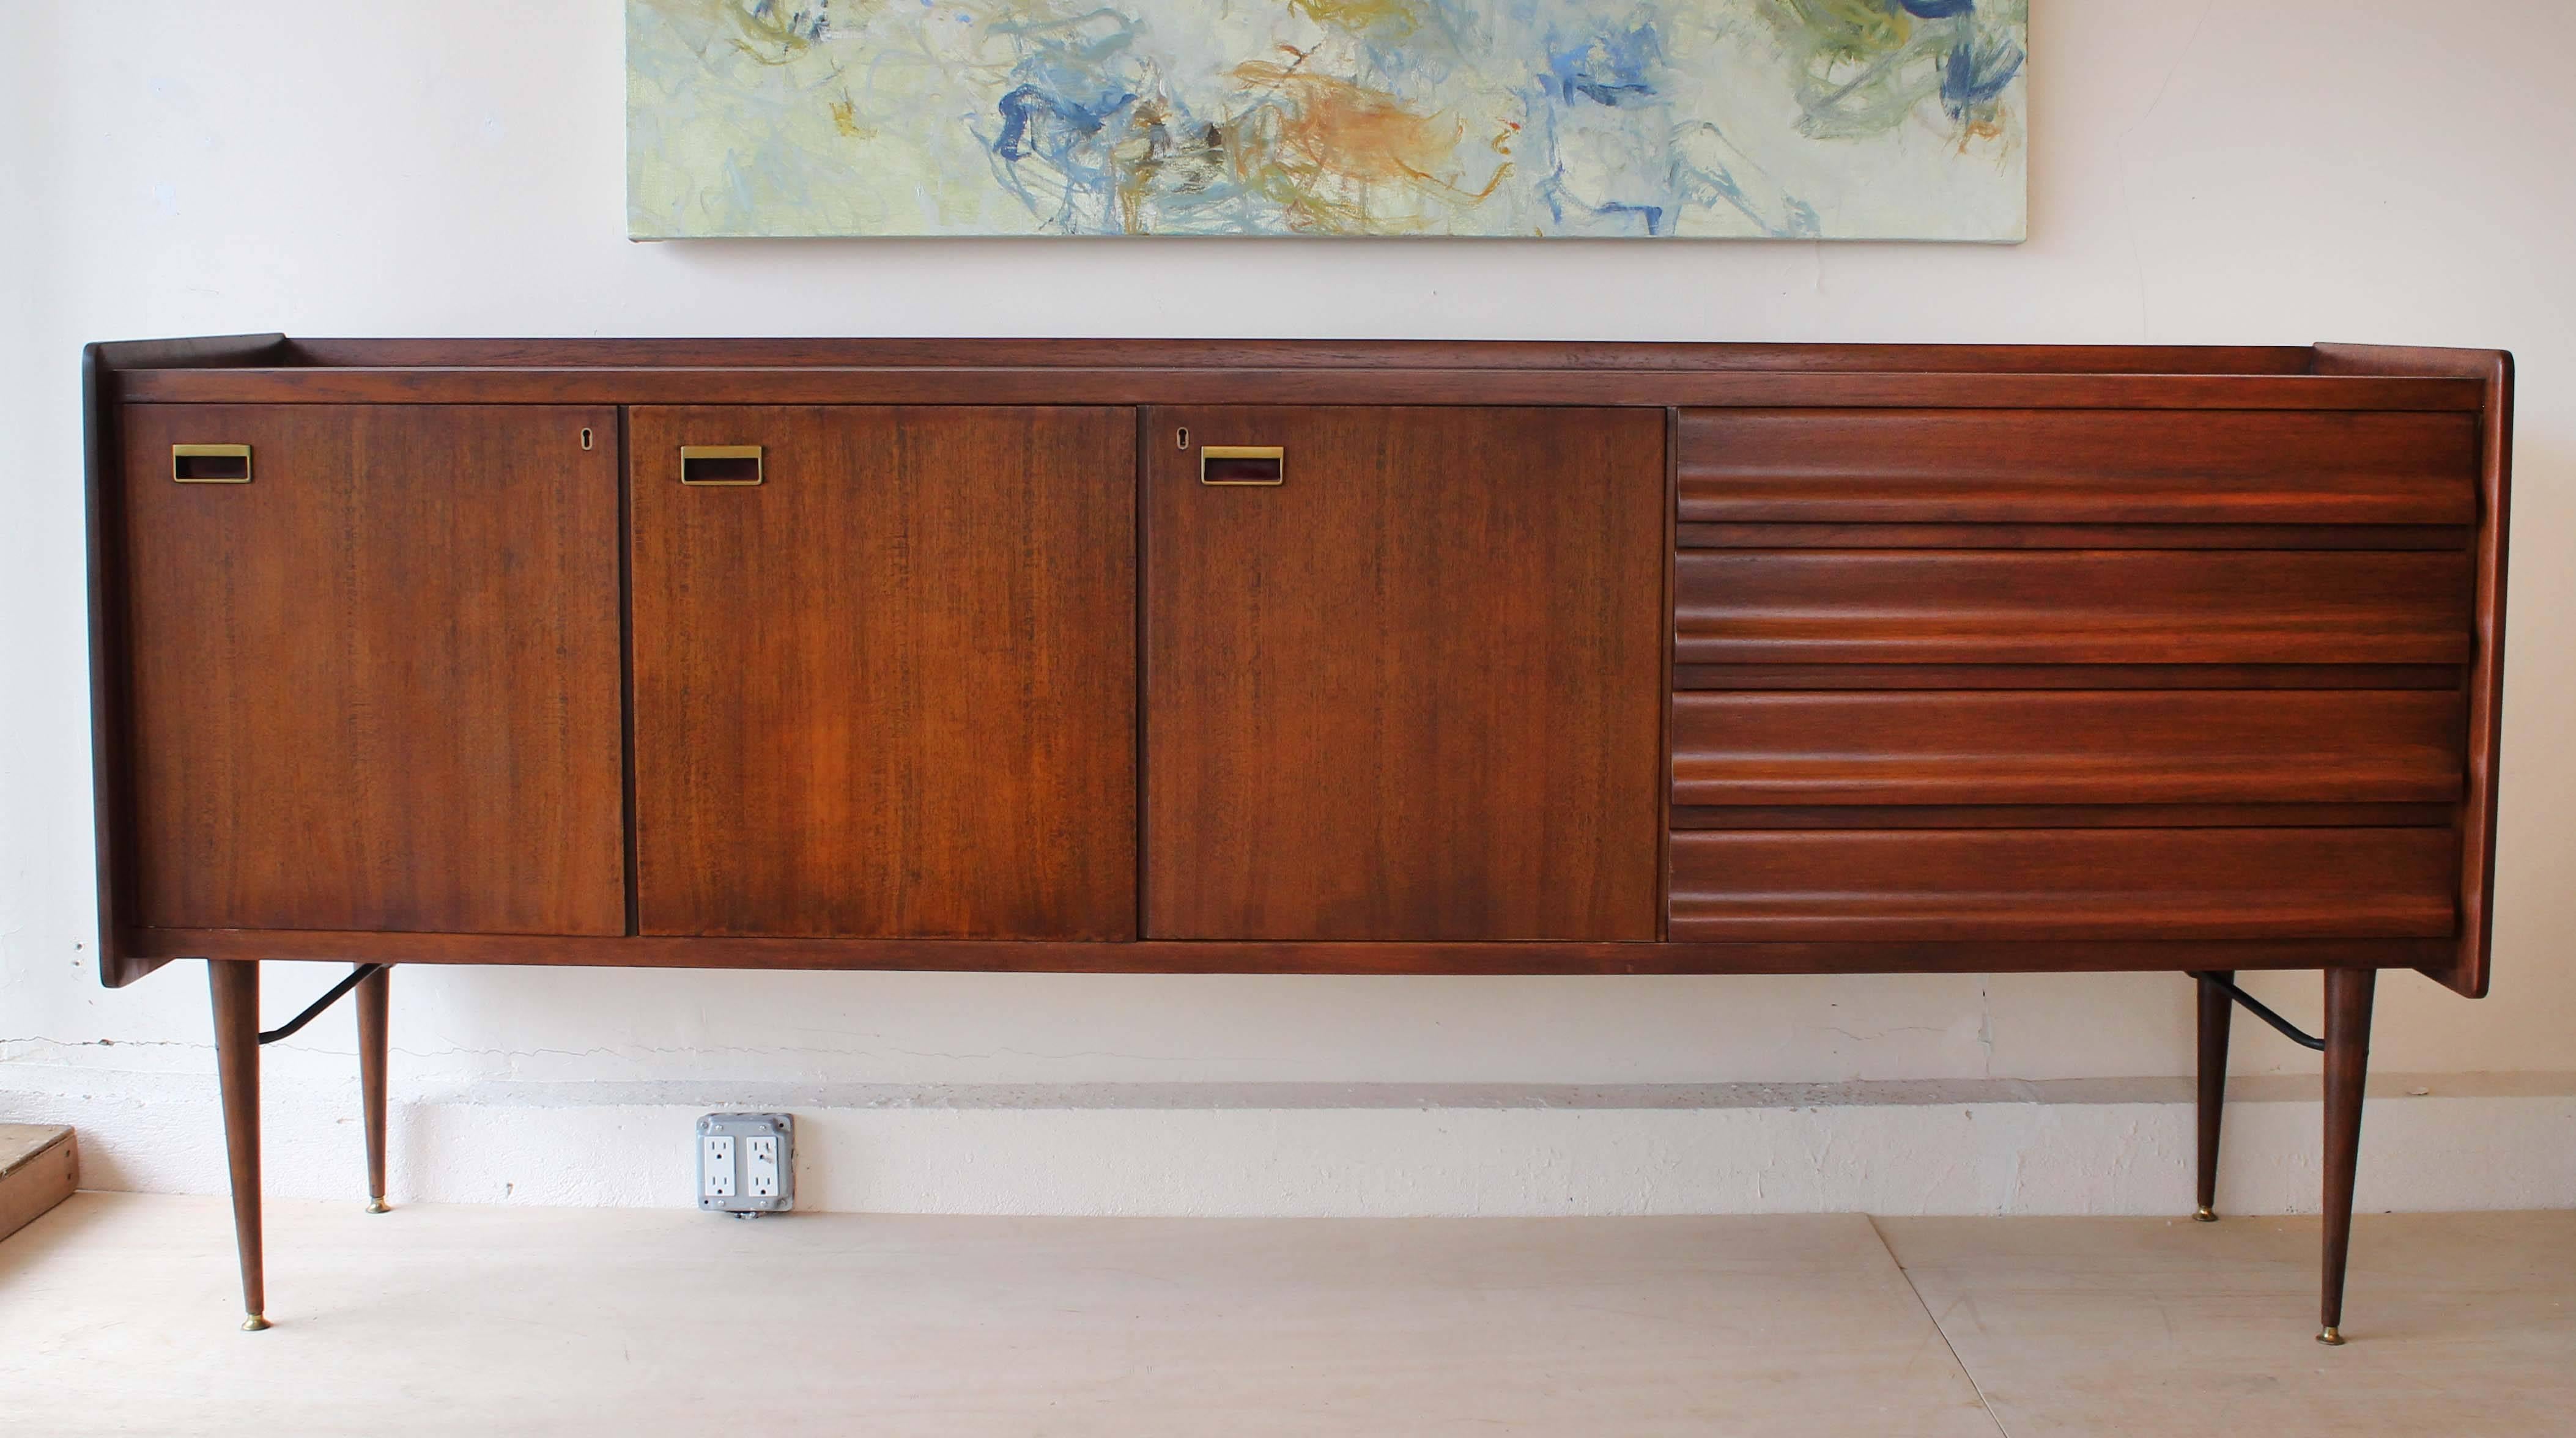 A handsome Mid-Century Italian wood sideboard with brass and enameled metal hardware.